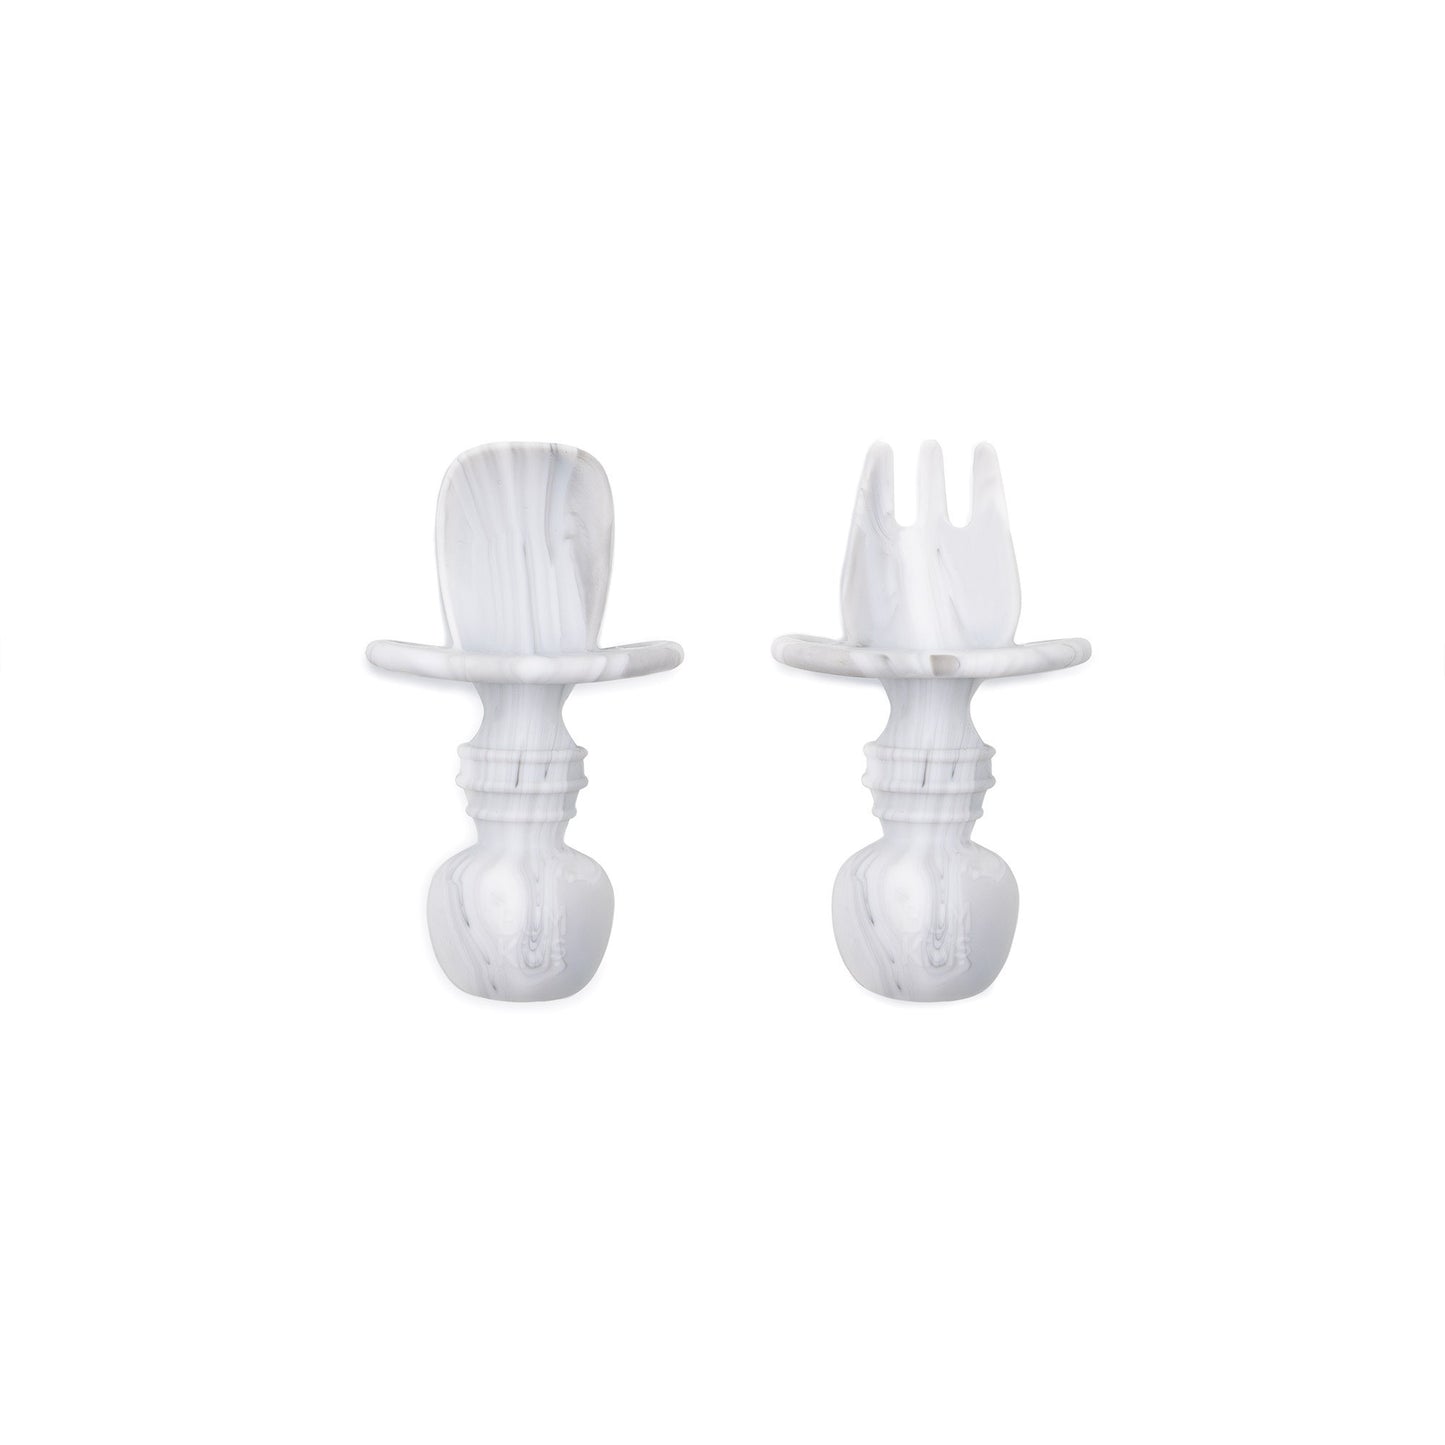 bumkins silicone chewtensils marble grey